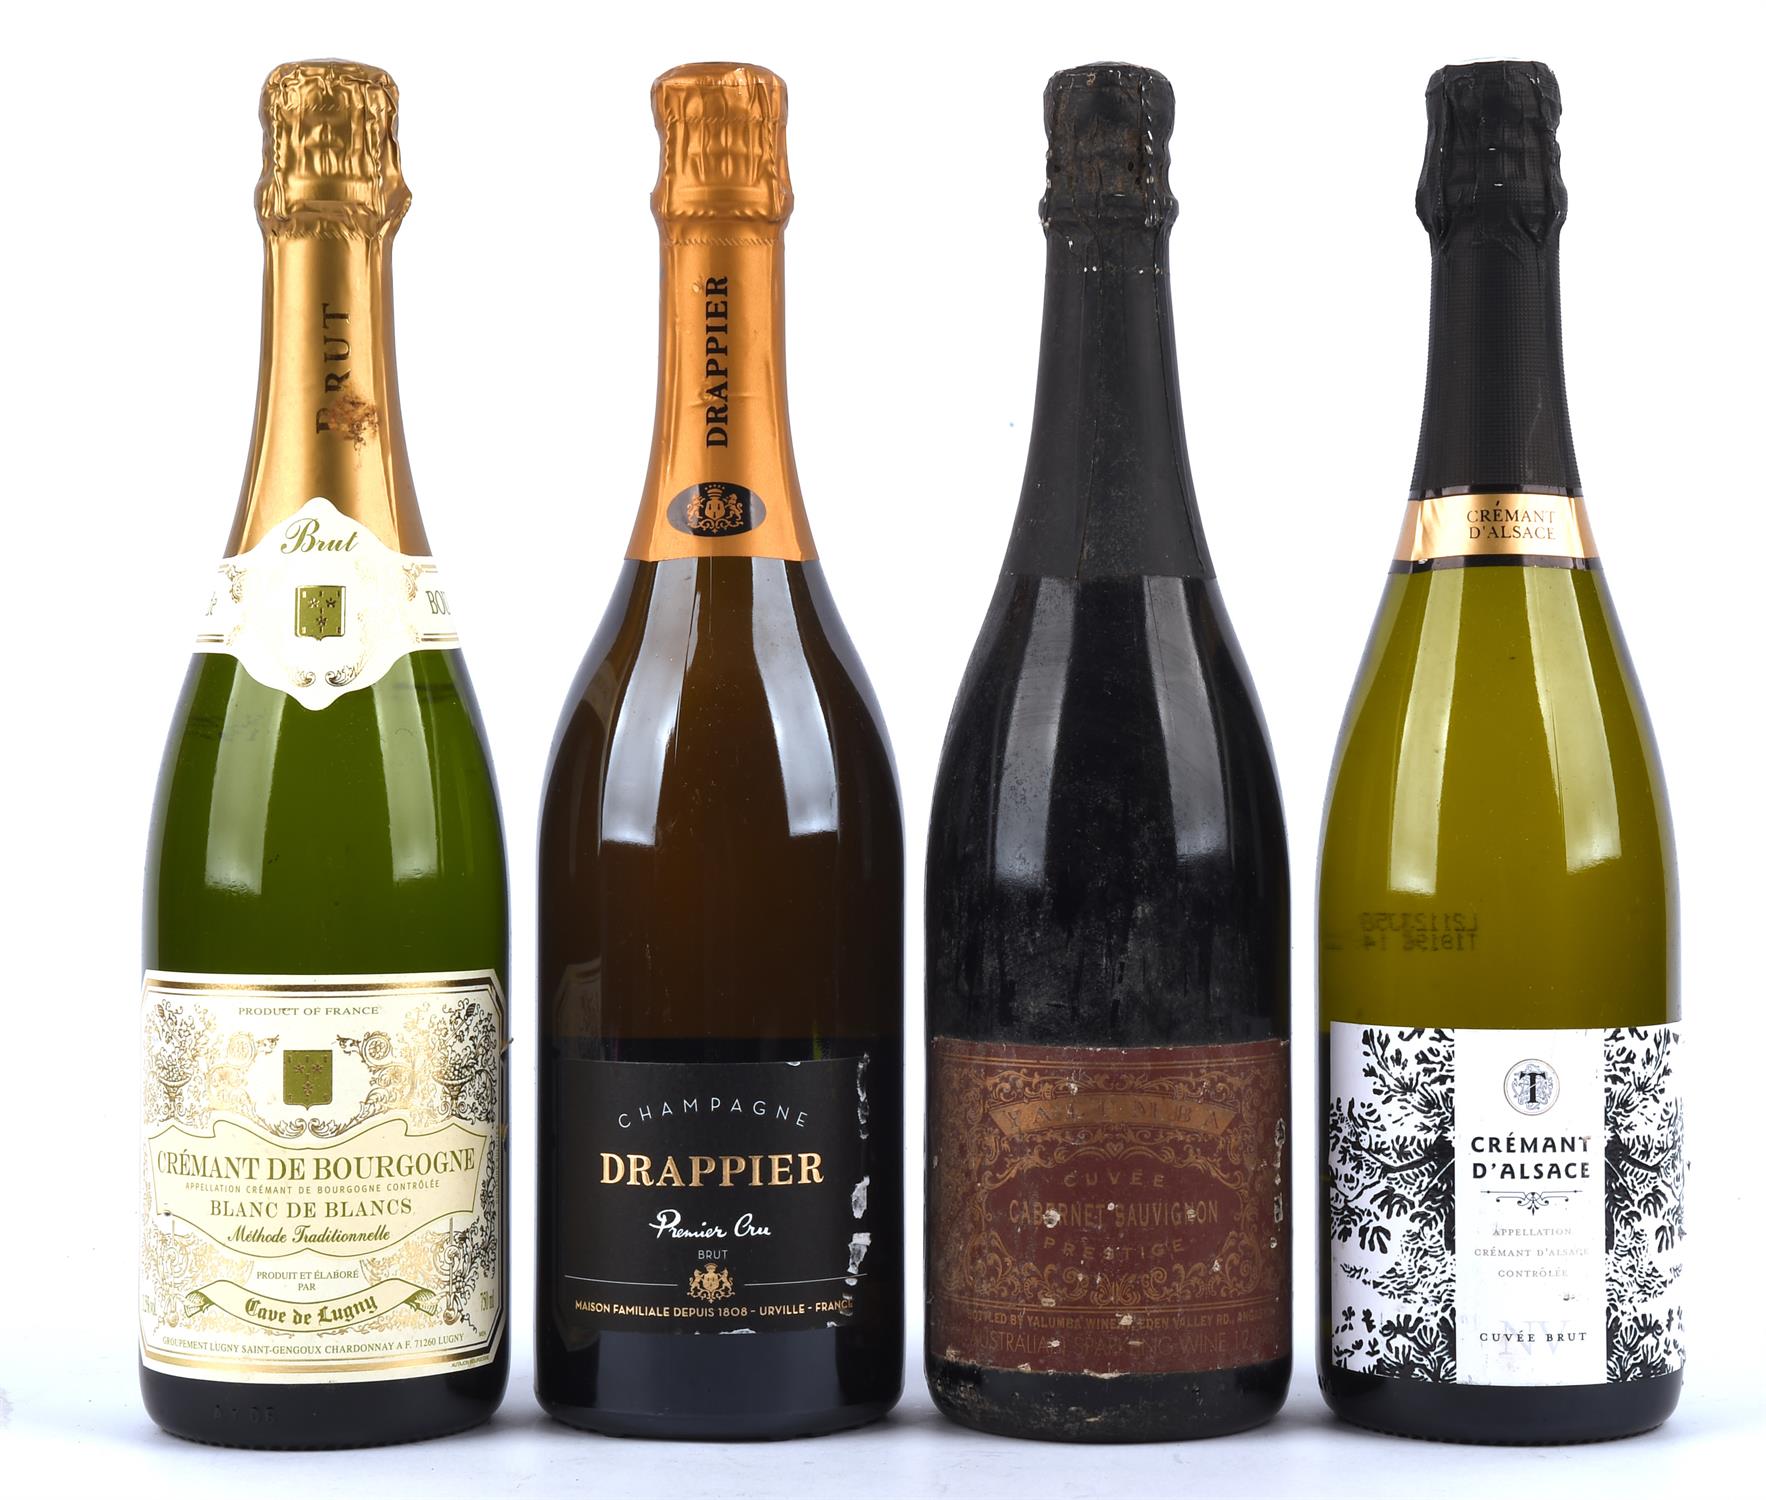 Champagne and Sparkling wines, Moet NV, Hubert Dauvergne, Drappier, together with sparkling wines, - Image 3 of 3